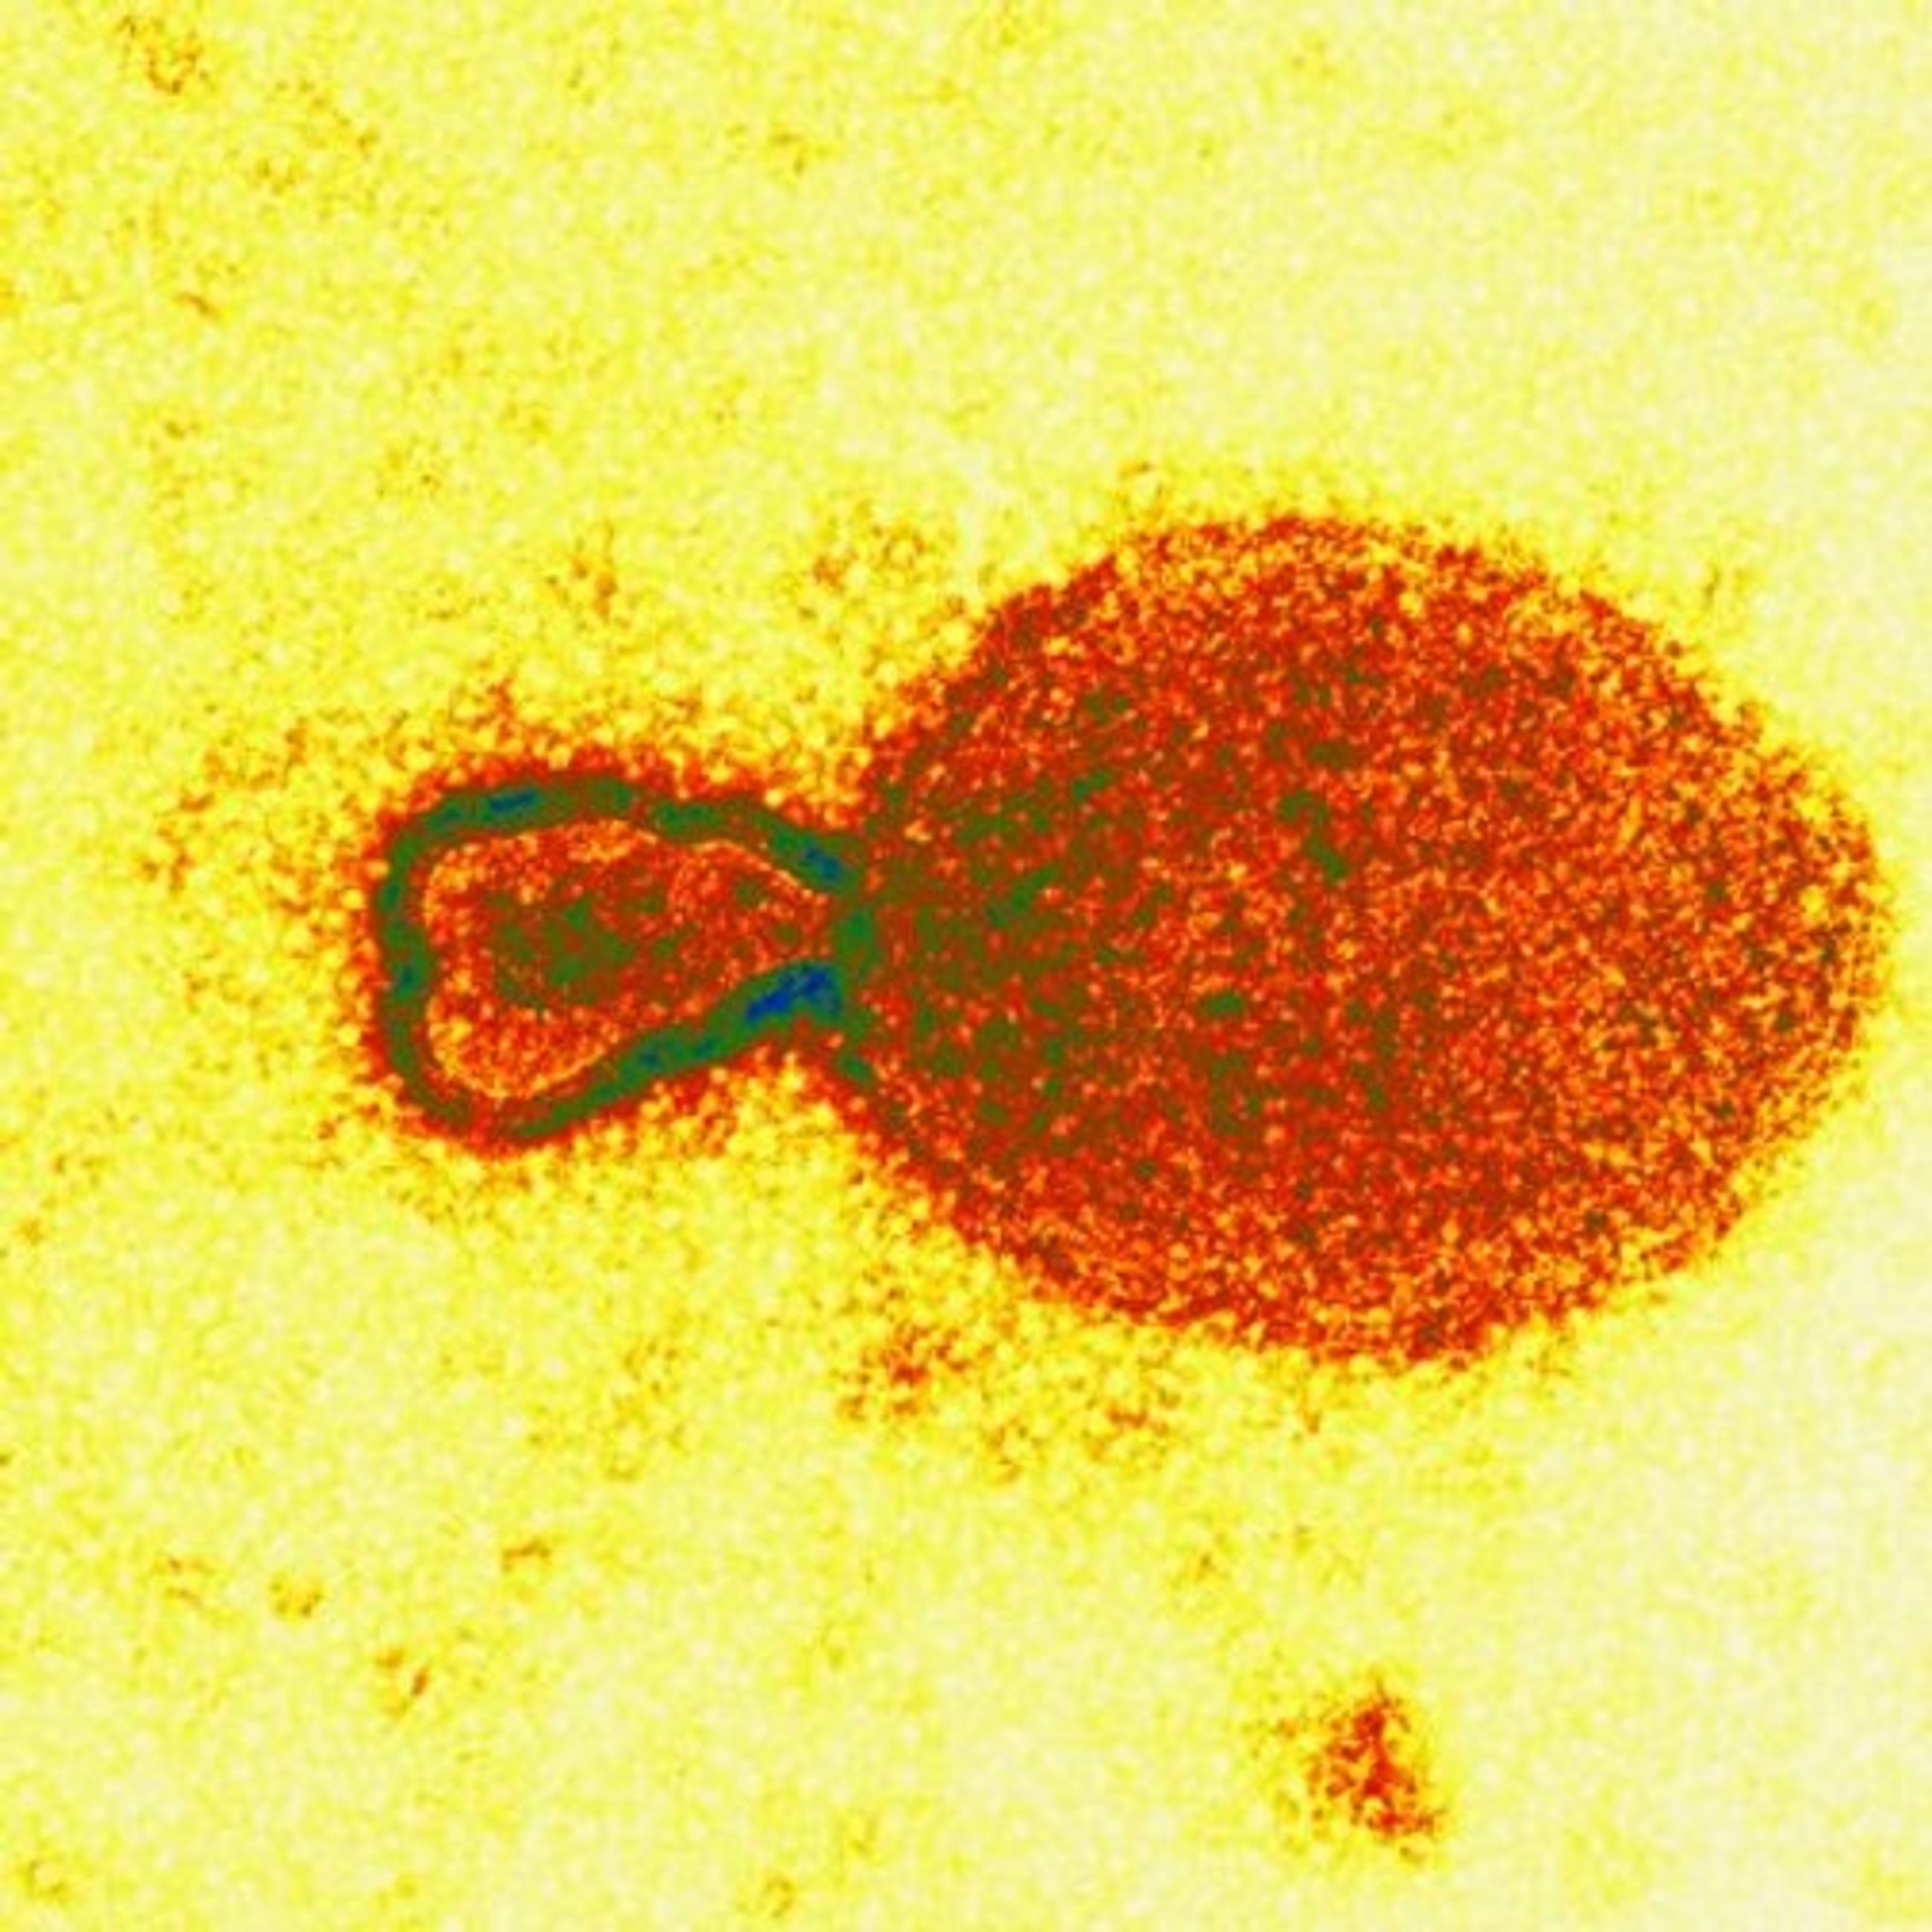 The mystery virus – isolated and identified